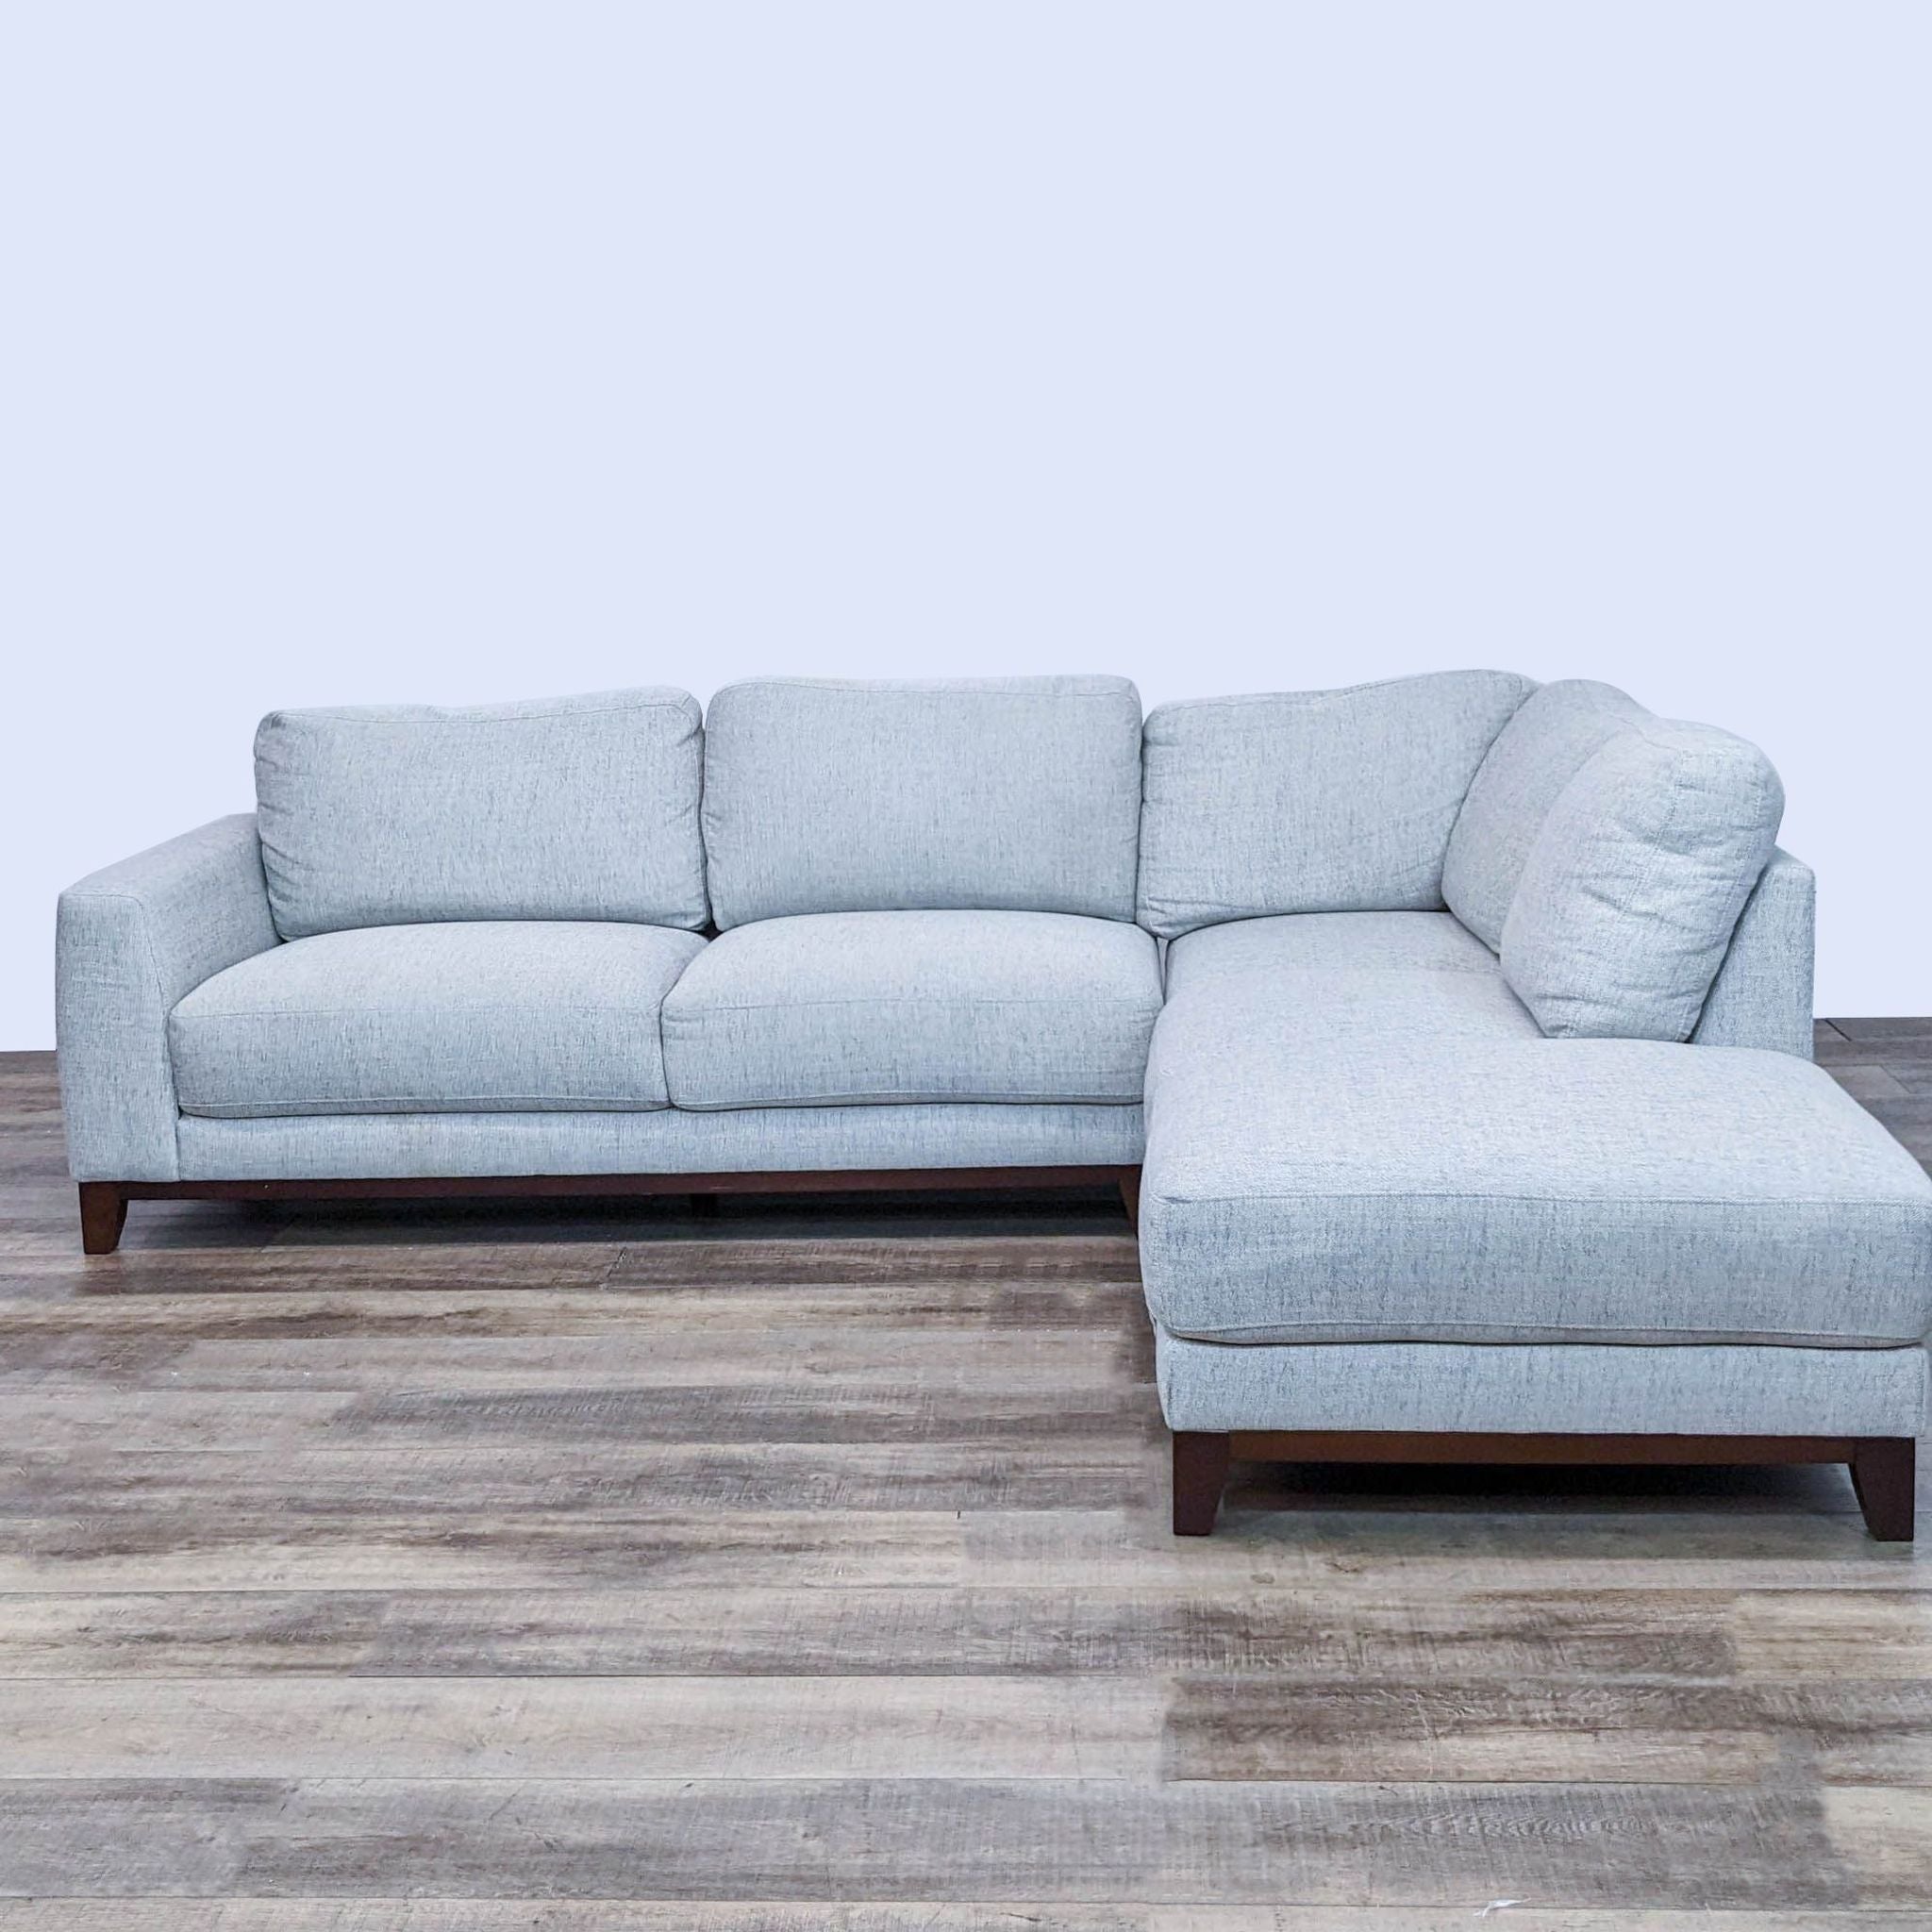 Neutral-colored 112" sectional sofa by Living Spaces, with plush back cushions on a dark frame, and a chaise on a wooden floor.